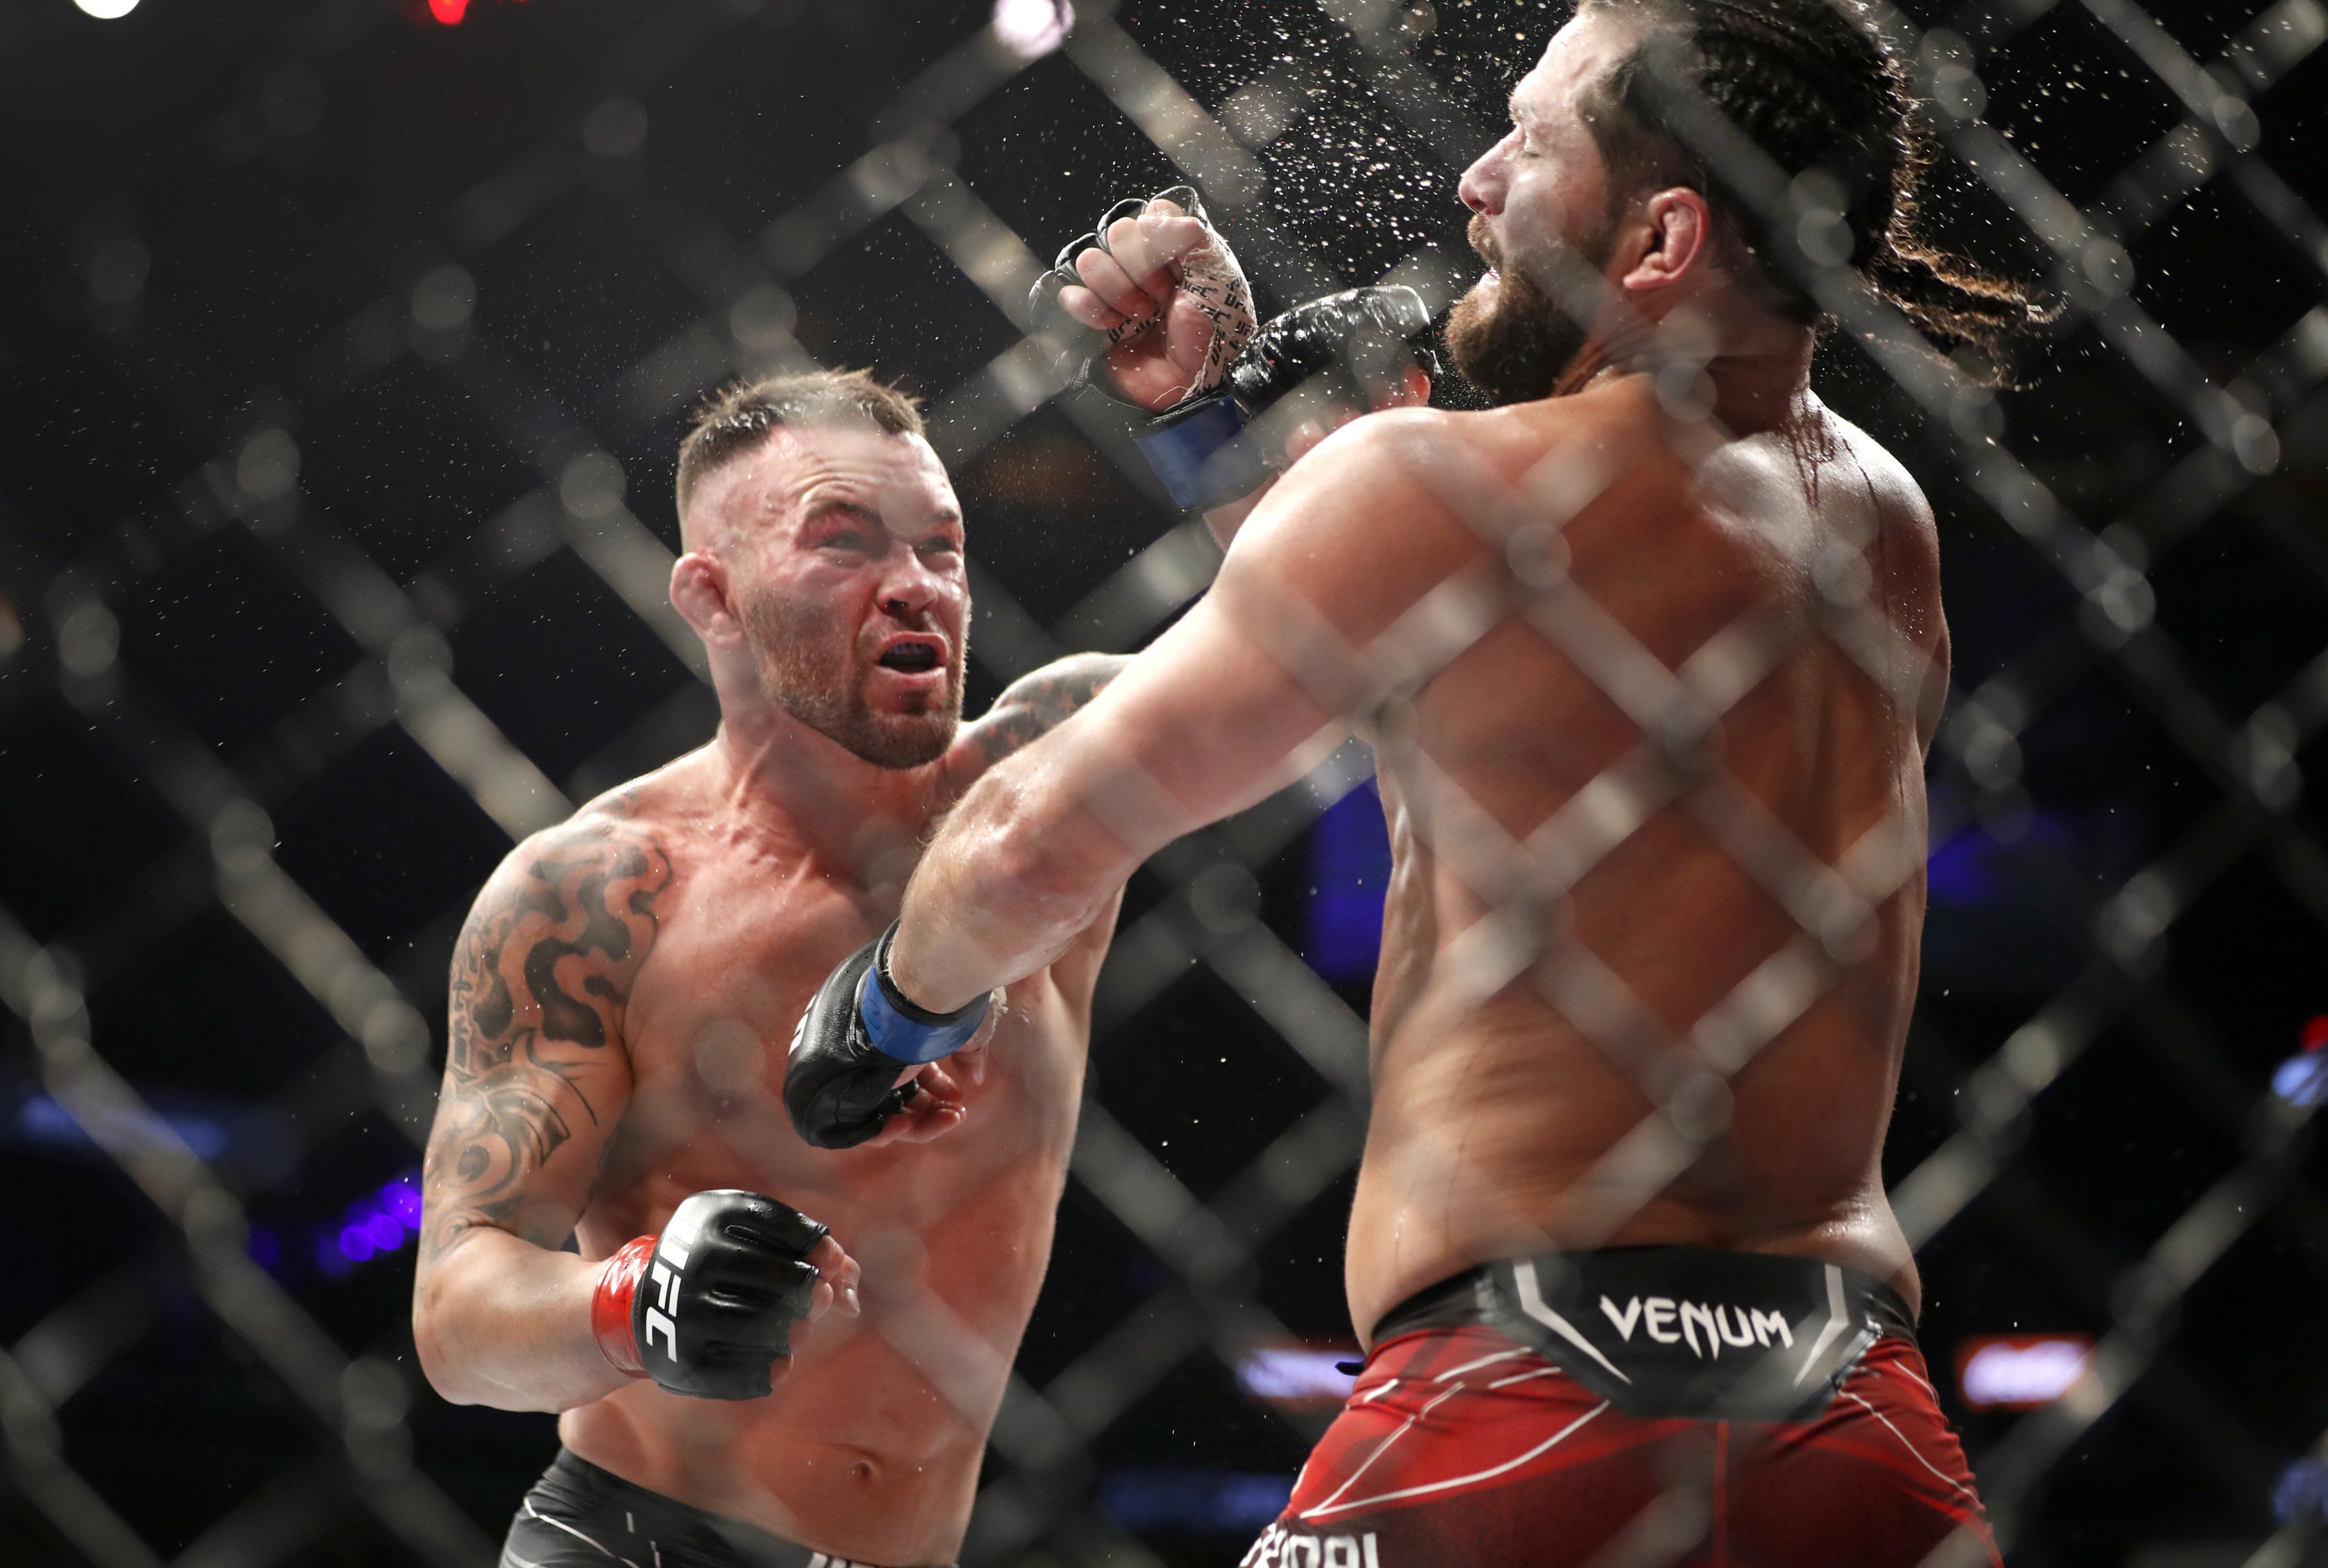 Colby Covington connects with a punch on Jorge Masvidal in the five-round main event at UFC 272. Photo: Steve Marcus/Las Vegas Sun via AP